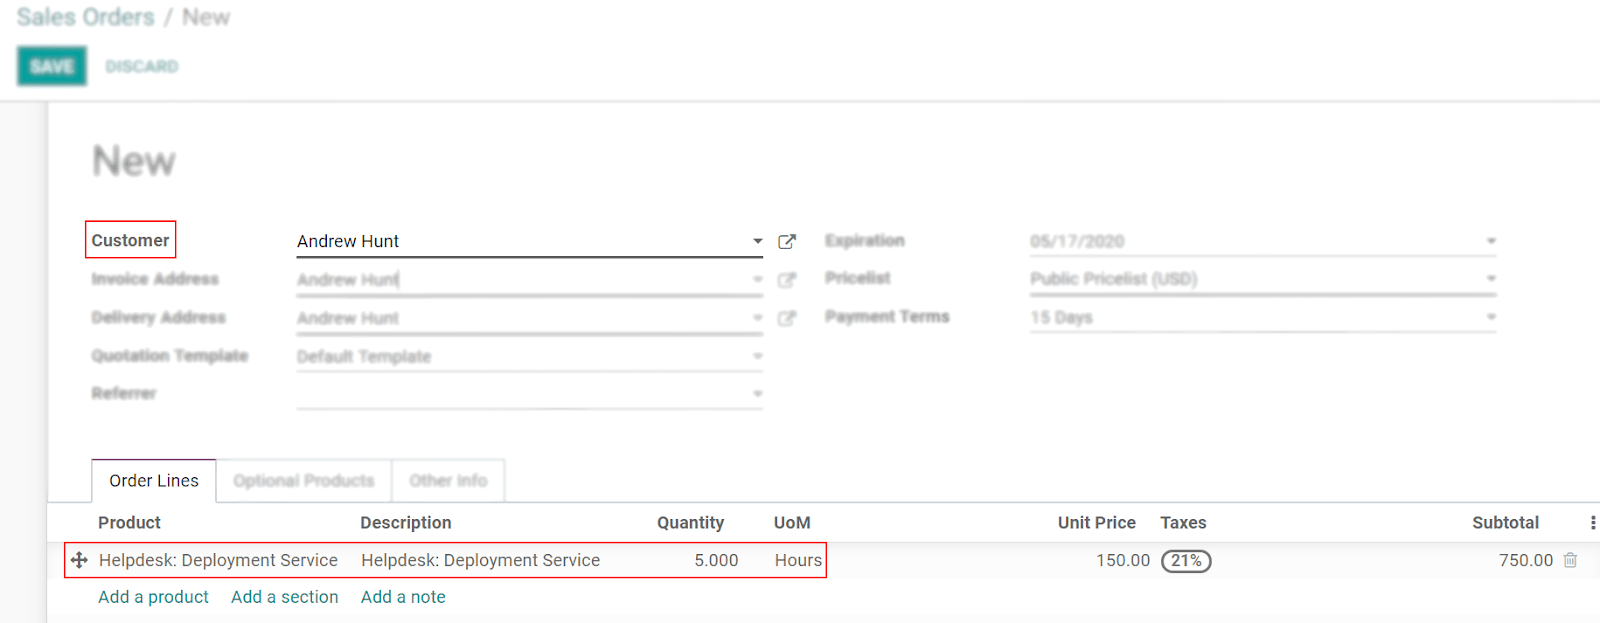 View of a sales order emphasizing the order lines in Odoo Sales